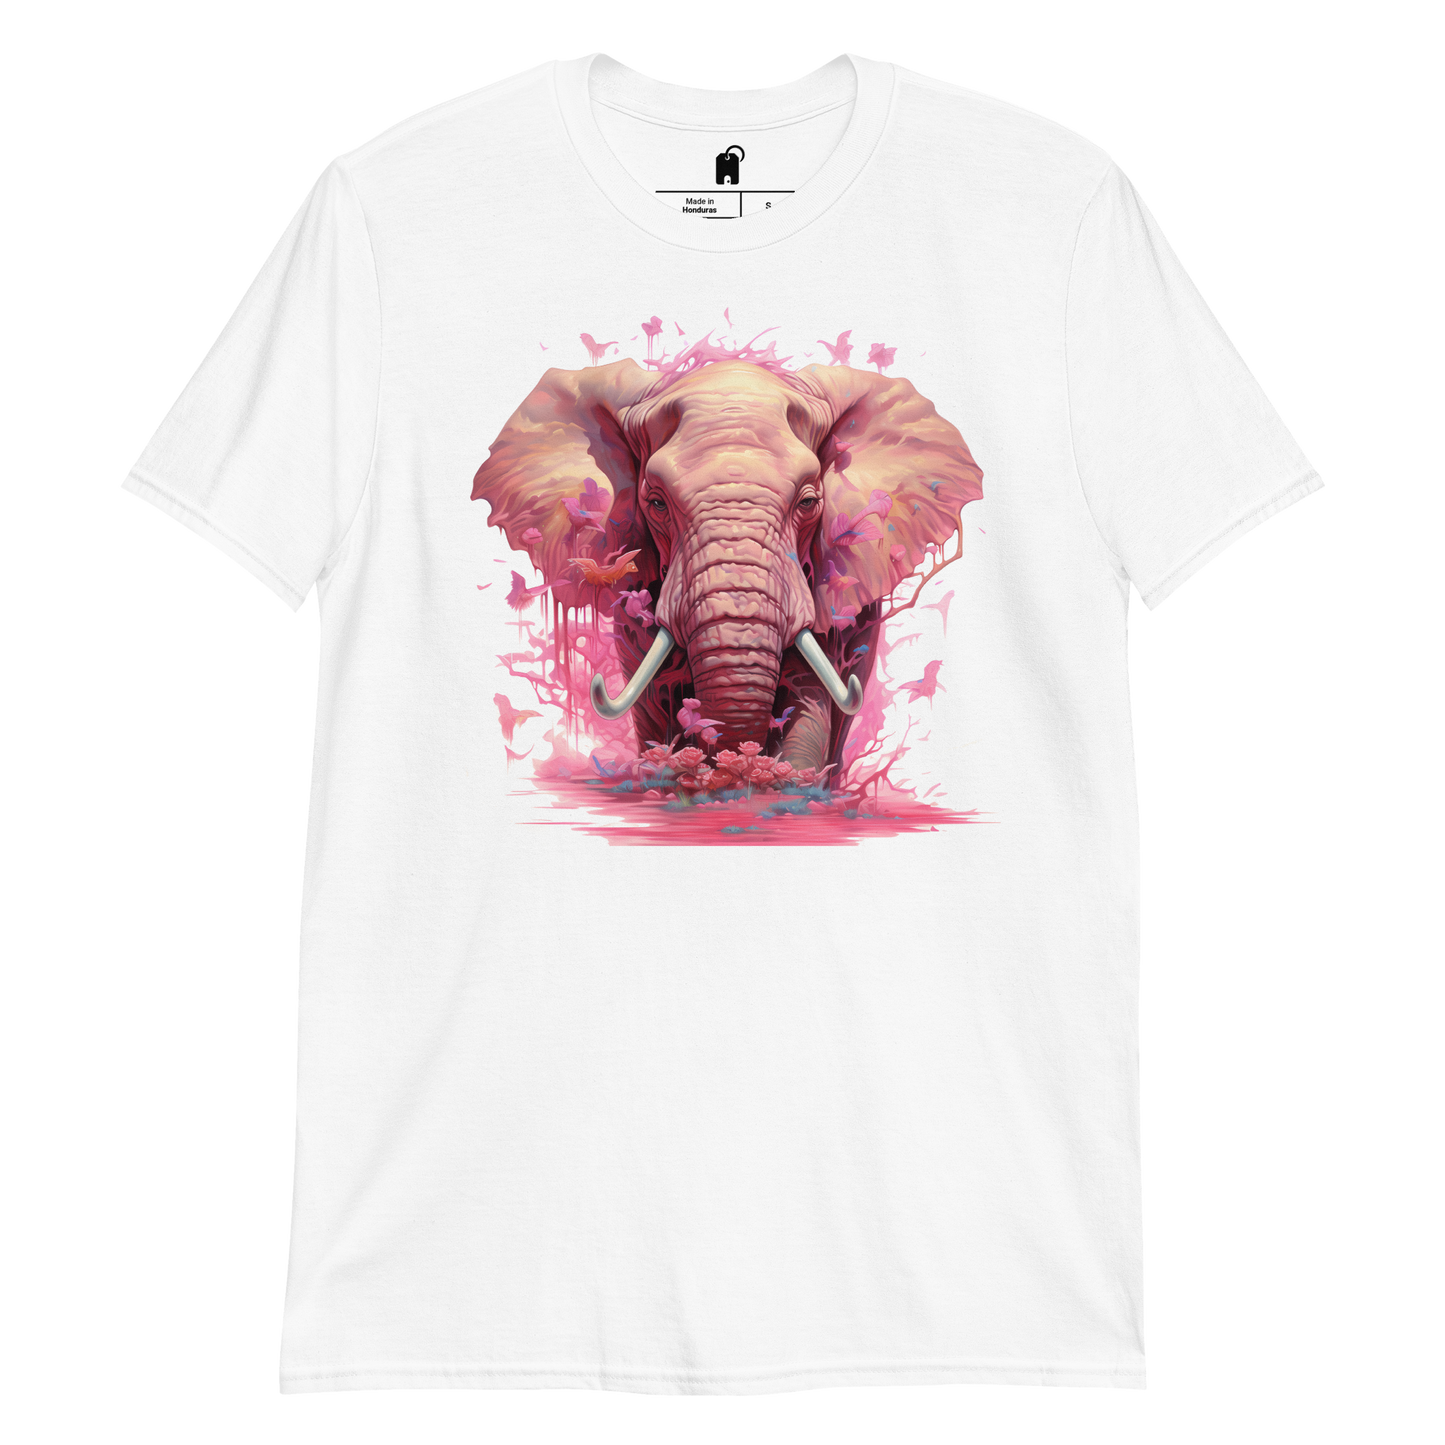 Pretty in Pink: Graphic Tee with Adorable Pink Elephant